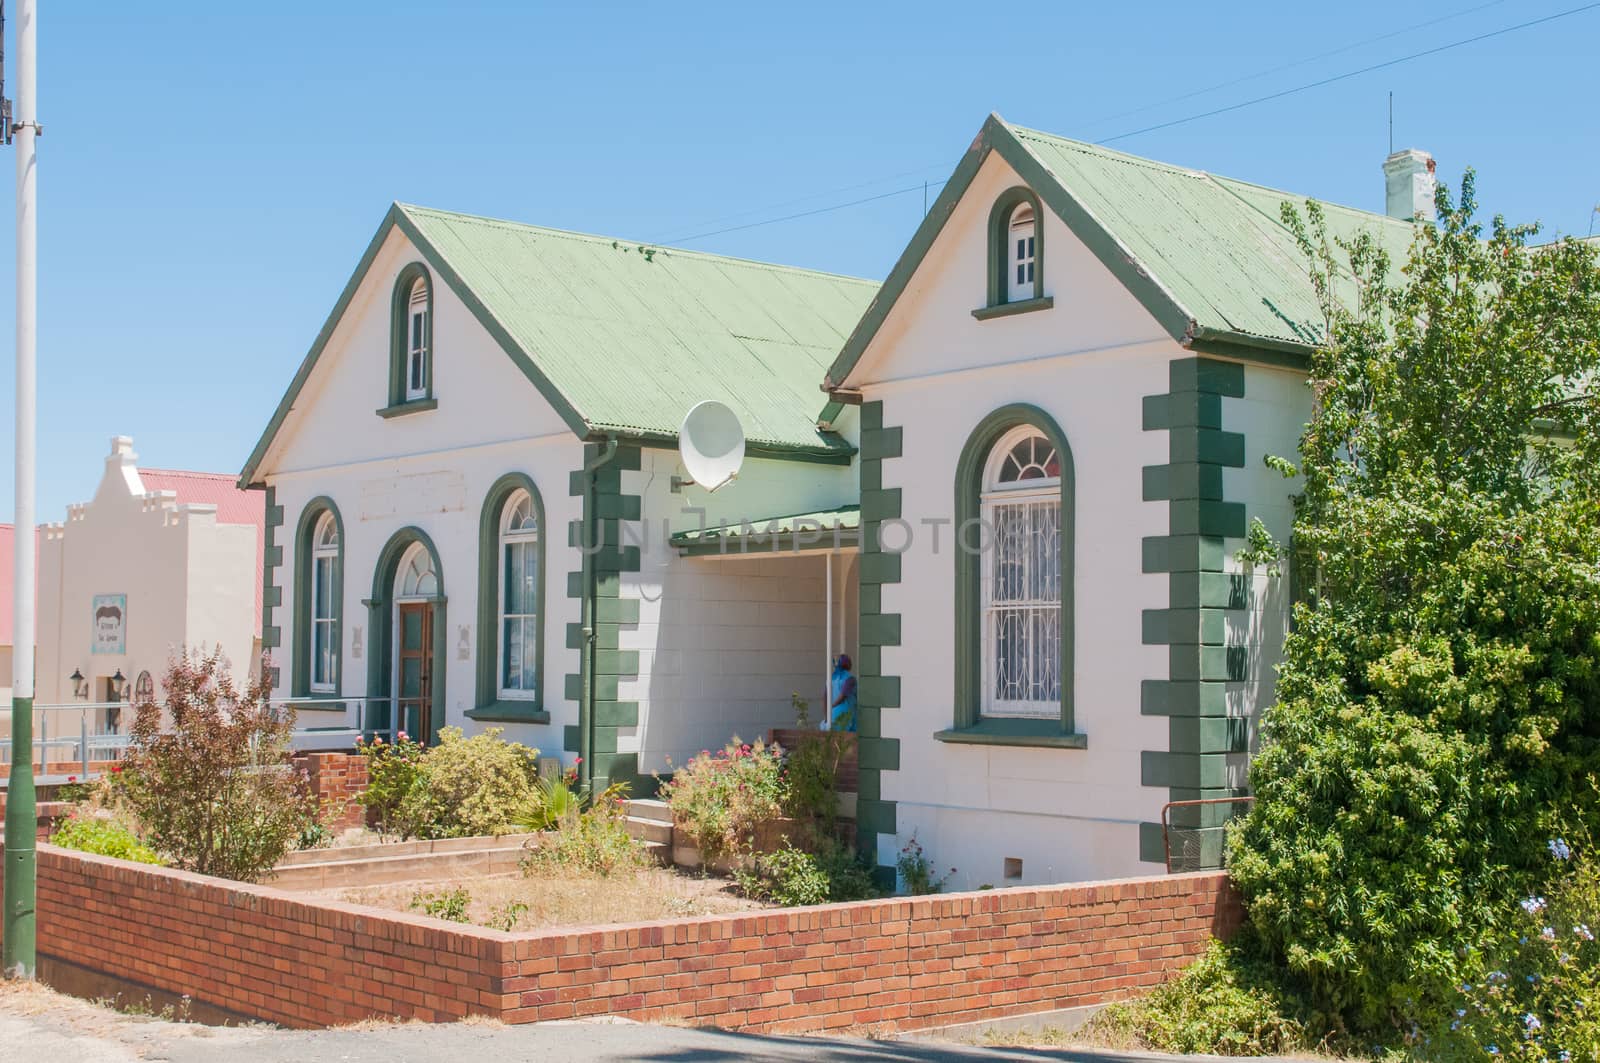 UNIONDALE, SOUTH AFRICA - JANUARY 6, 2015: A historic house in Little Karoo town of Uniondale